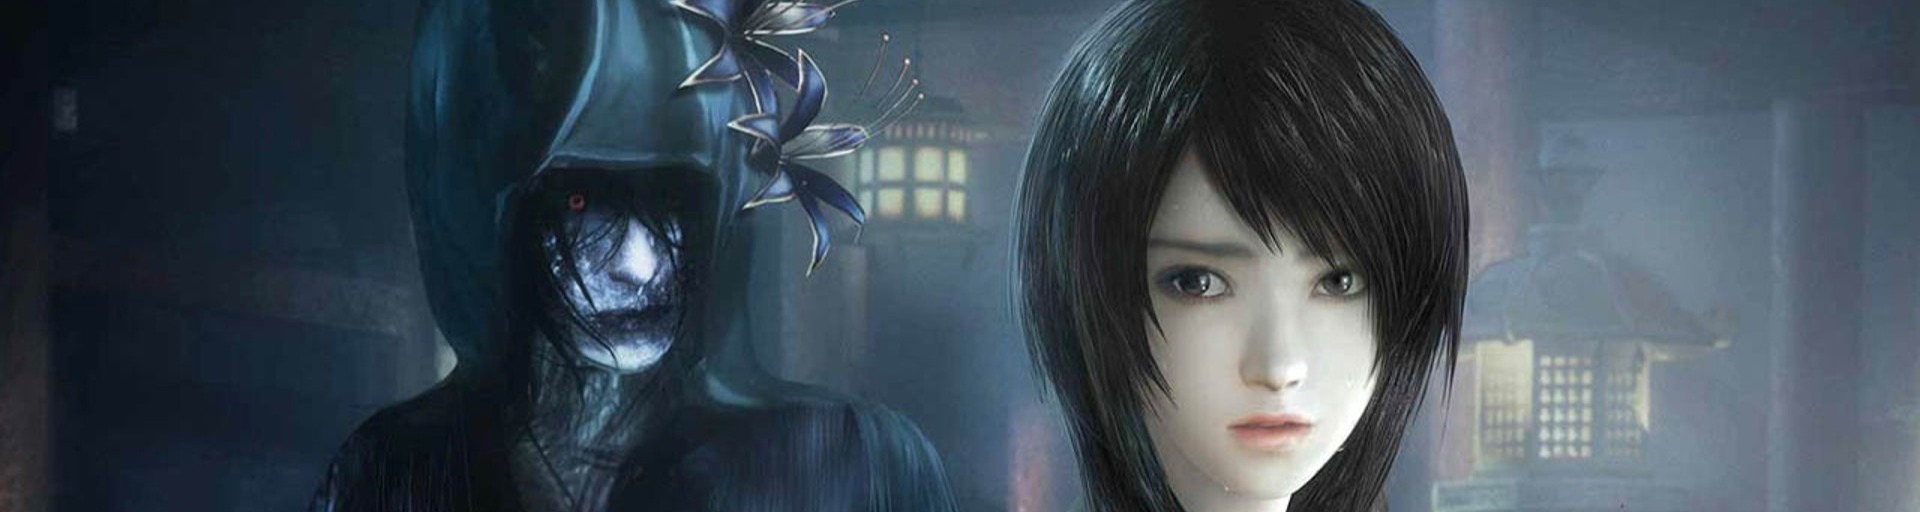 FATAL FRAME / PROJECT ZERO: Maiden of Black Water Deluxe Edition bg